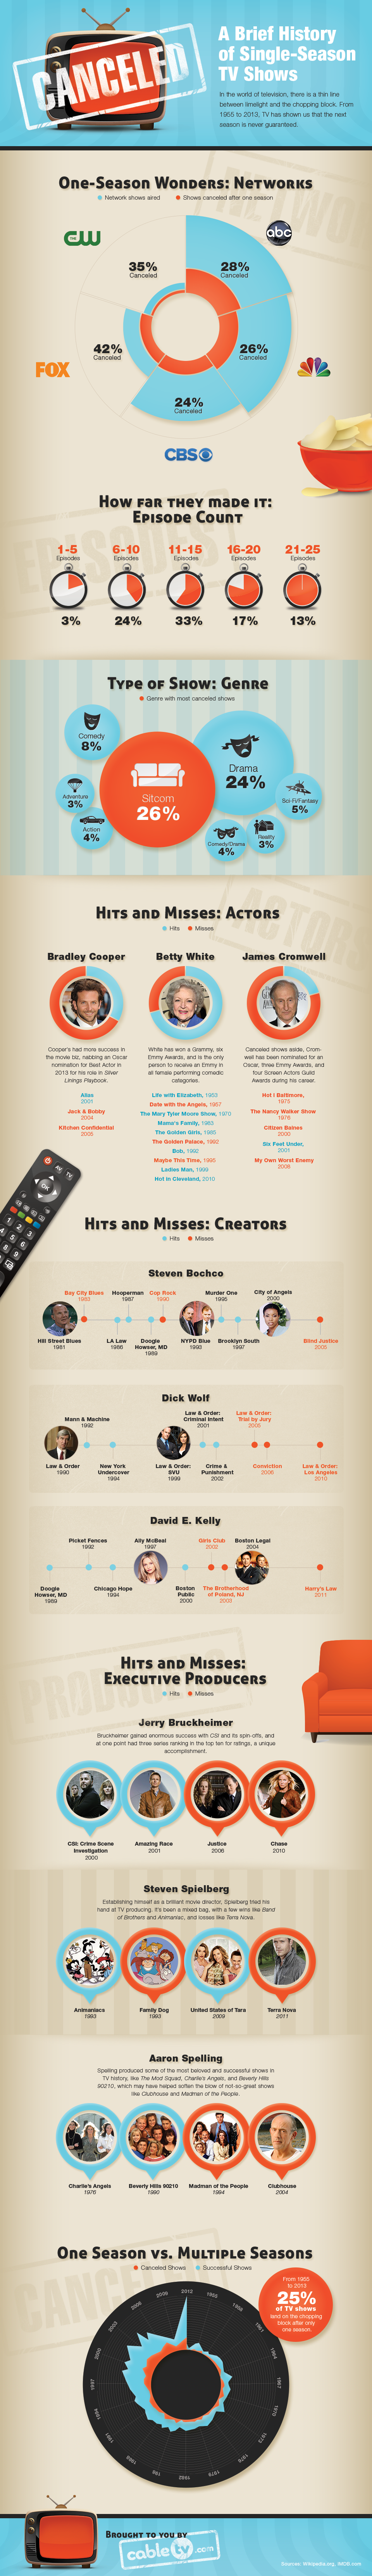 Here’s a Fun and Depressing Graphic About Television, Ratings, and Dudes Who Create Shows